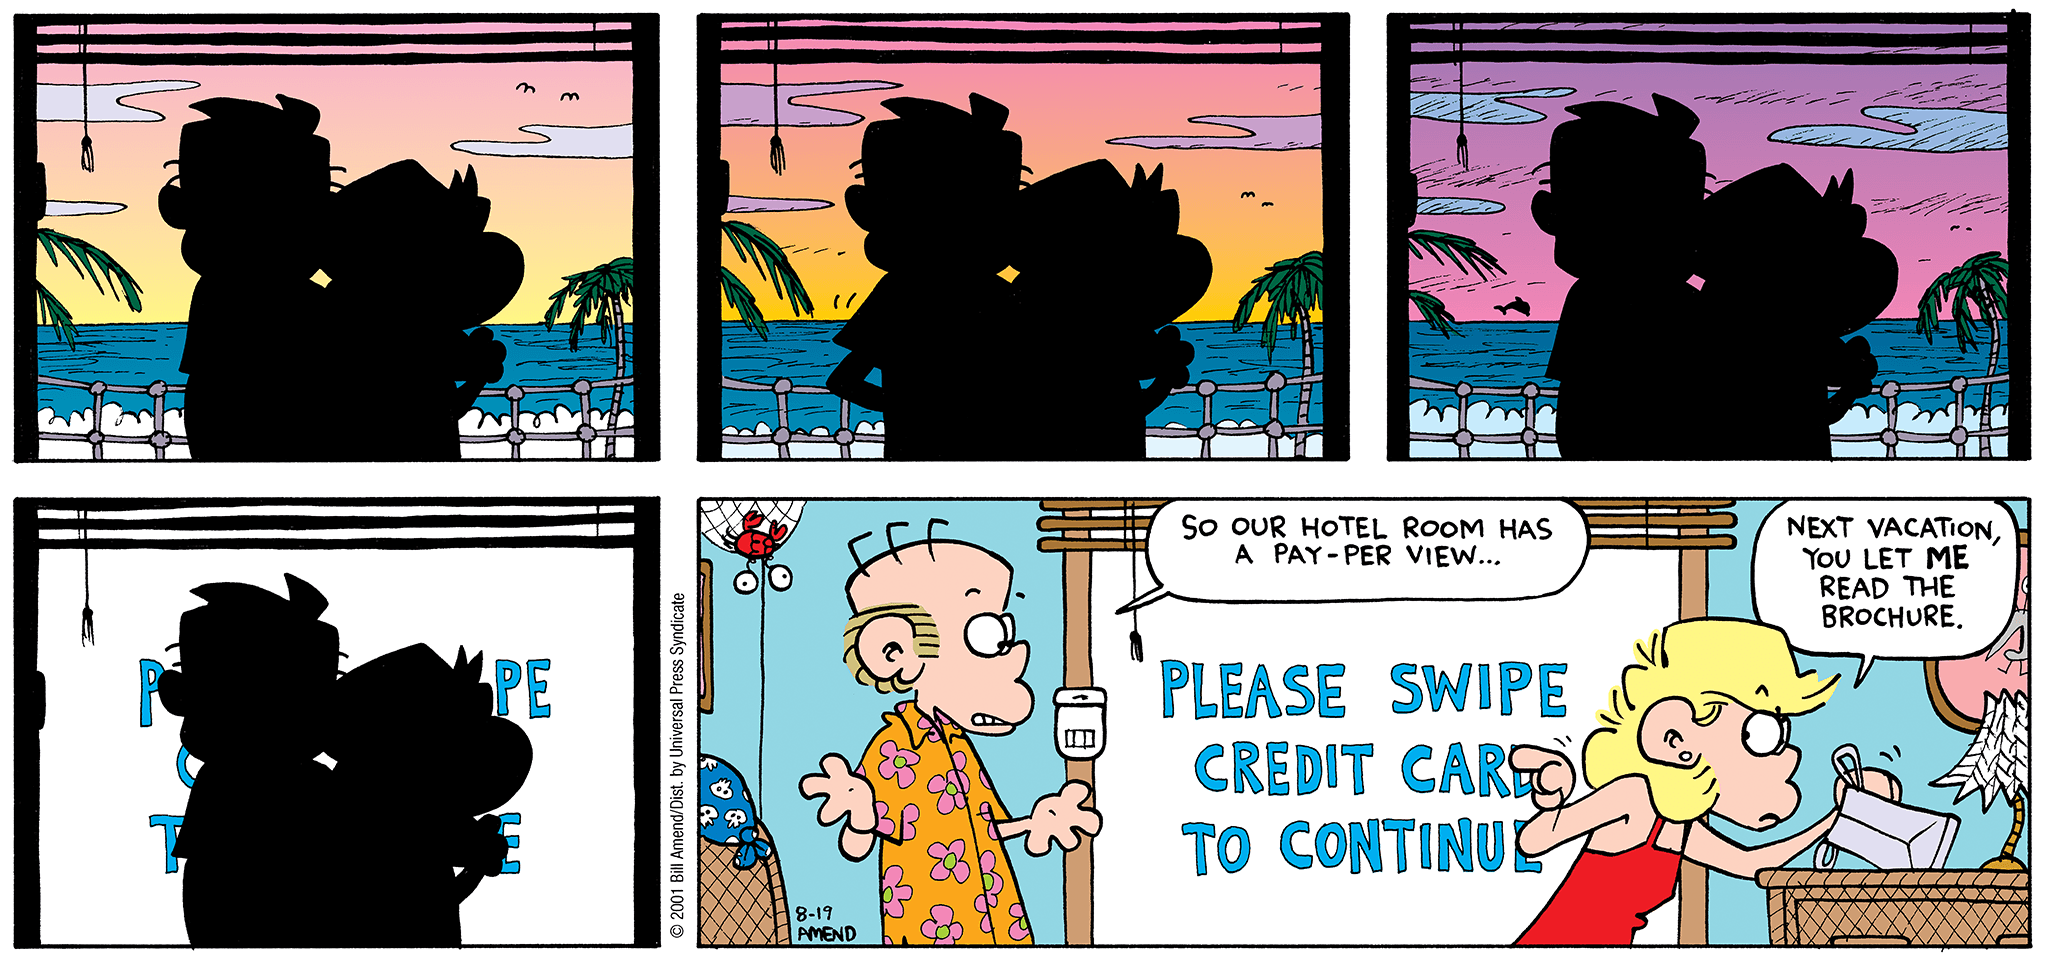 FoxTrot comic strip by Bill Amend - August 19, 2001 - Caribbeanny Vacation